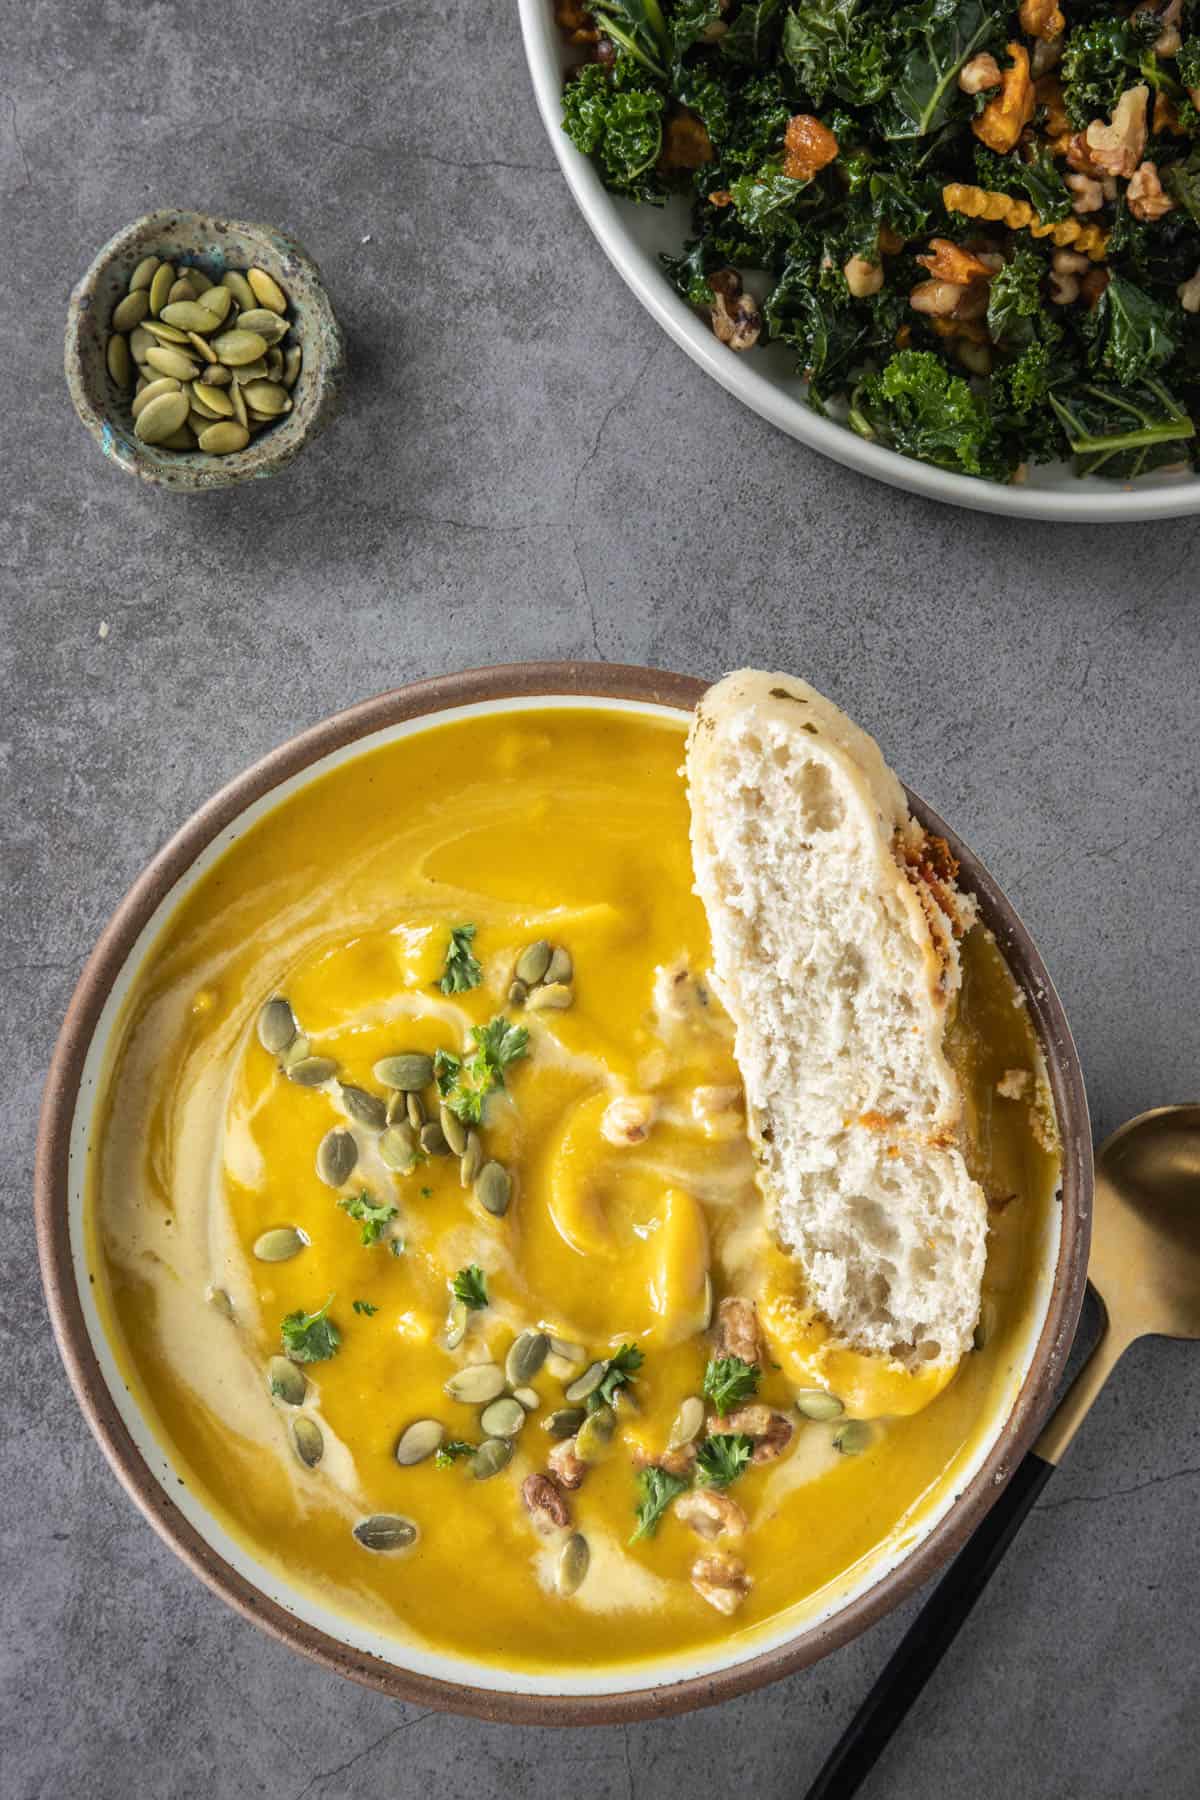 Bowl of pumpkin soup with bread in it, garnish pumpkin seeds and salad in the background